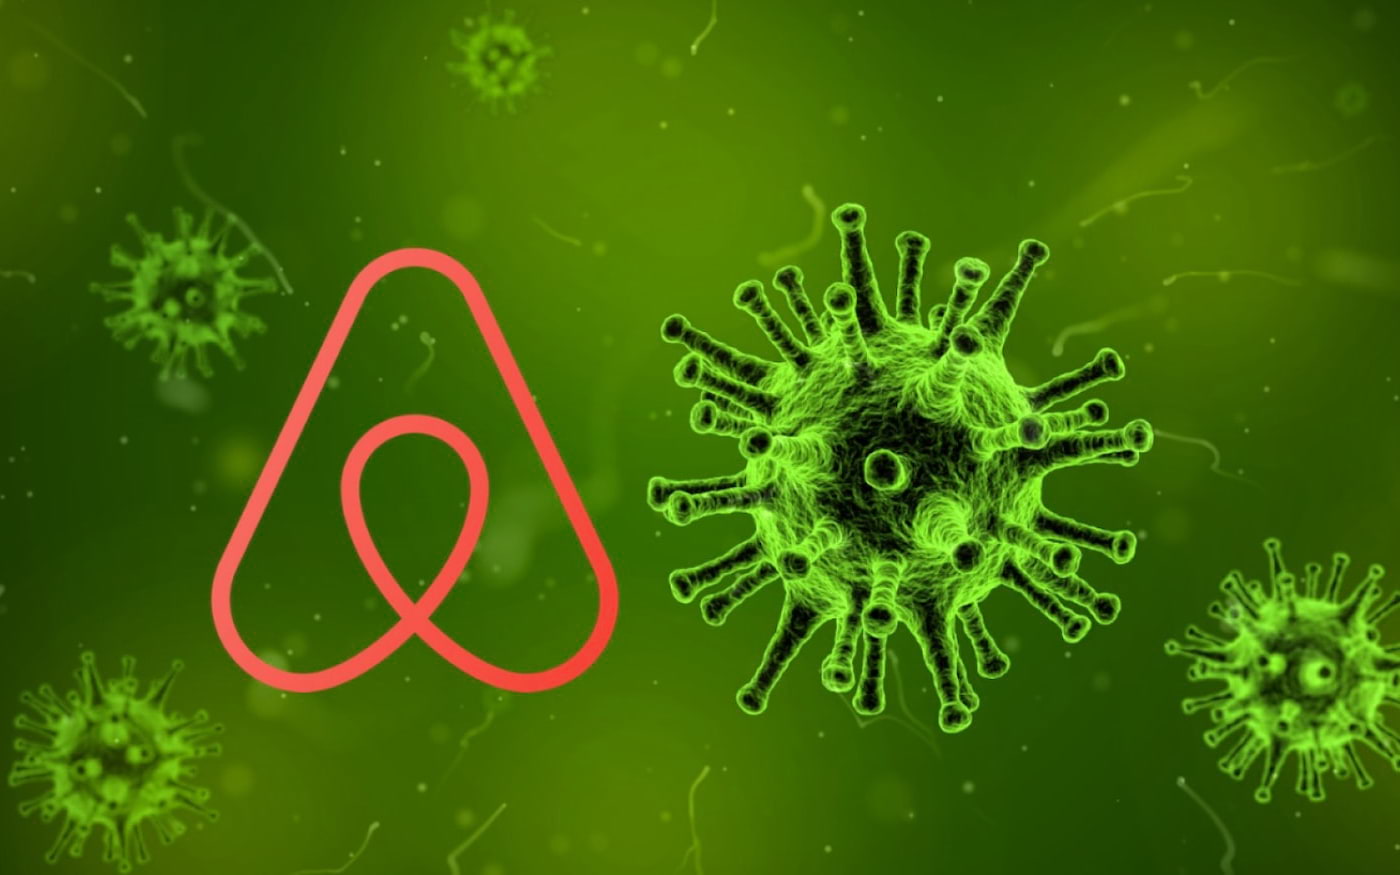 Airbnb activates its force majeure policy due to Coronavirus outbreaks (COVID-19)